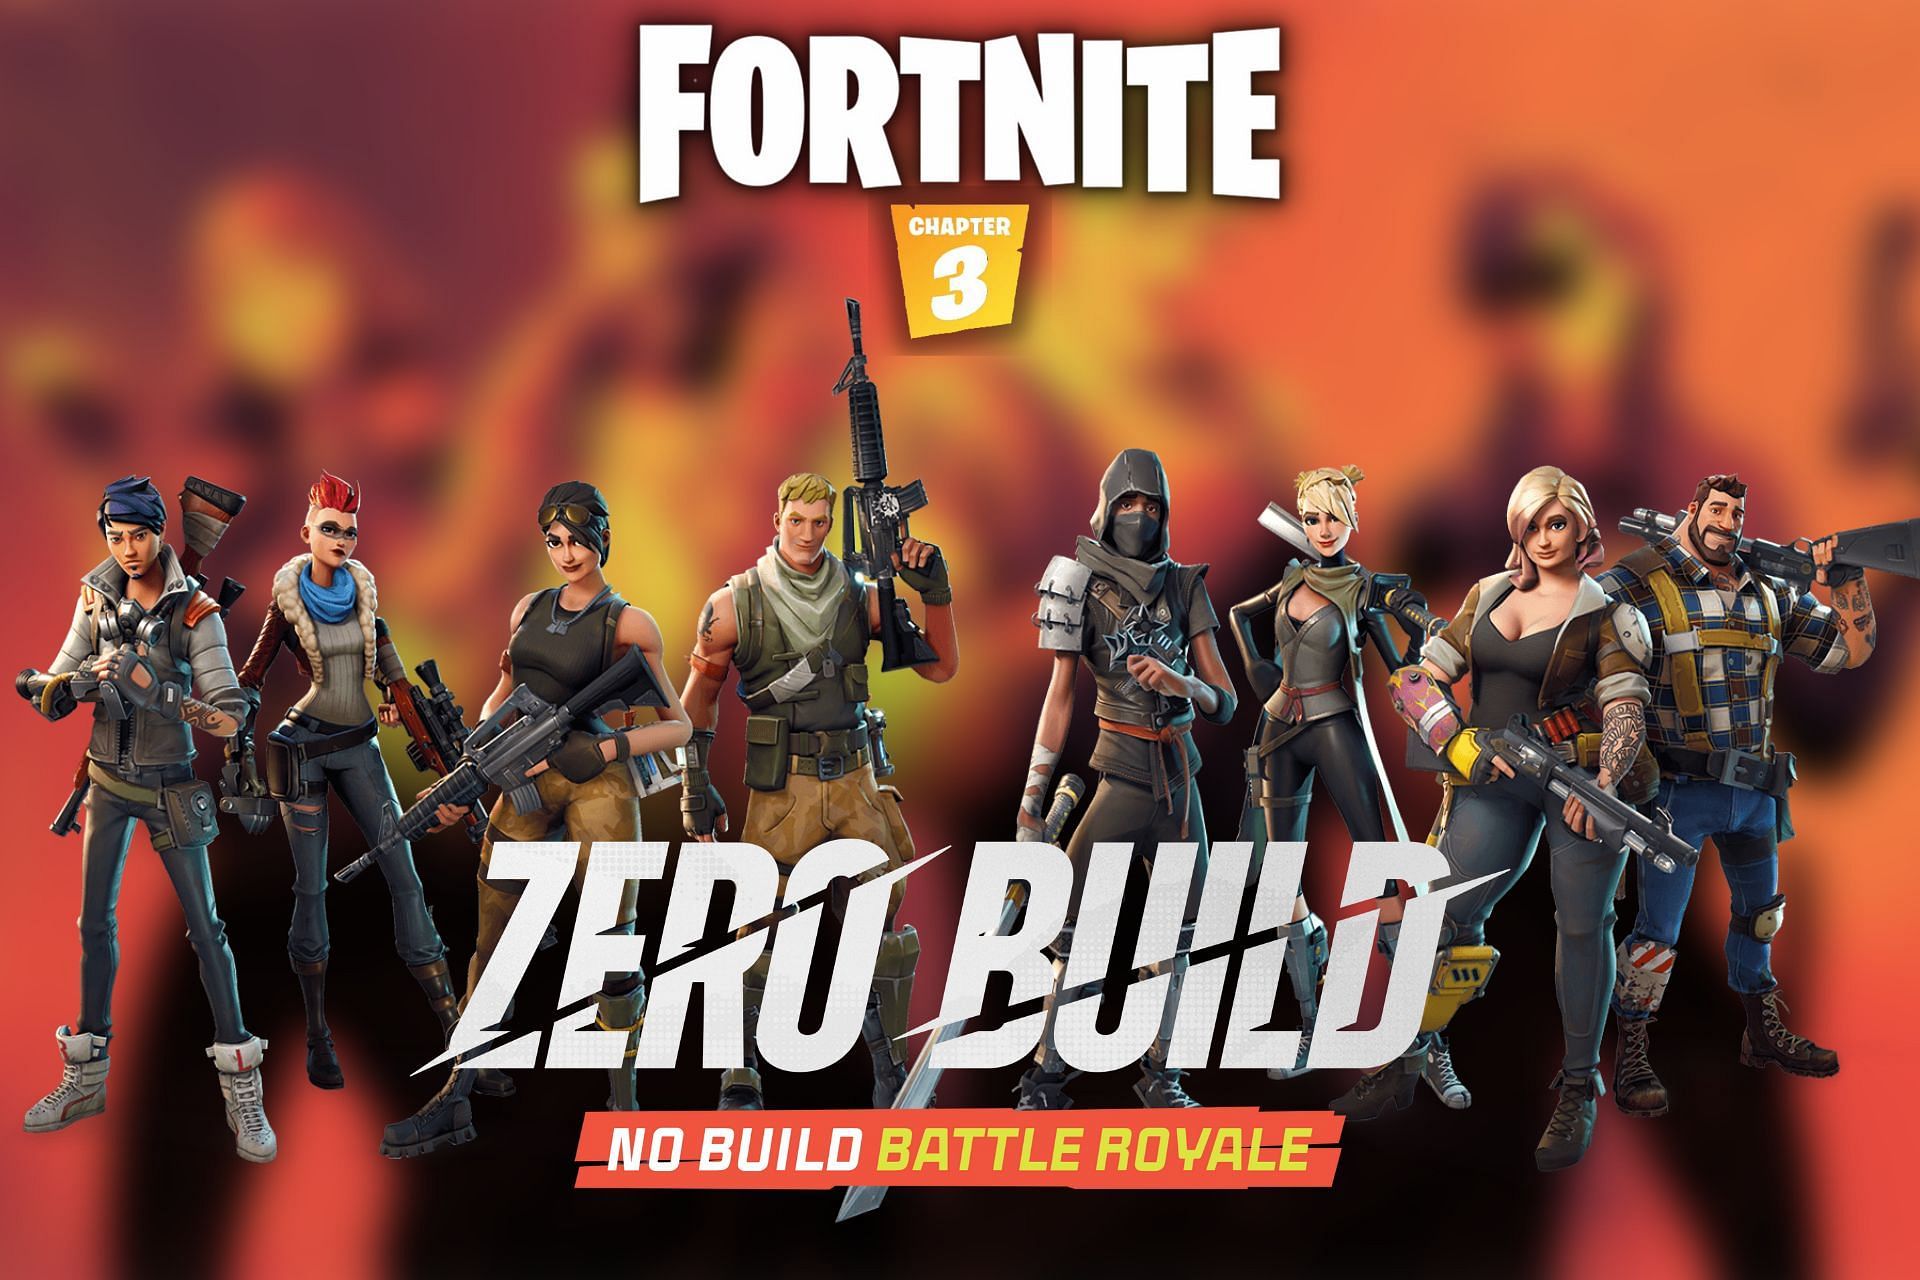 iFireMonkey on X: The Nindo challenges have been updated, you can now do  ANY of them in Zero Build or Battle Royale in any team mode (solos, duos,  trios, & squads)  /